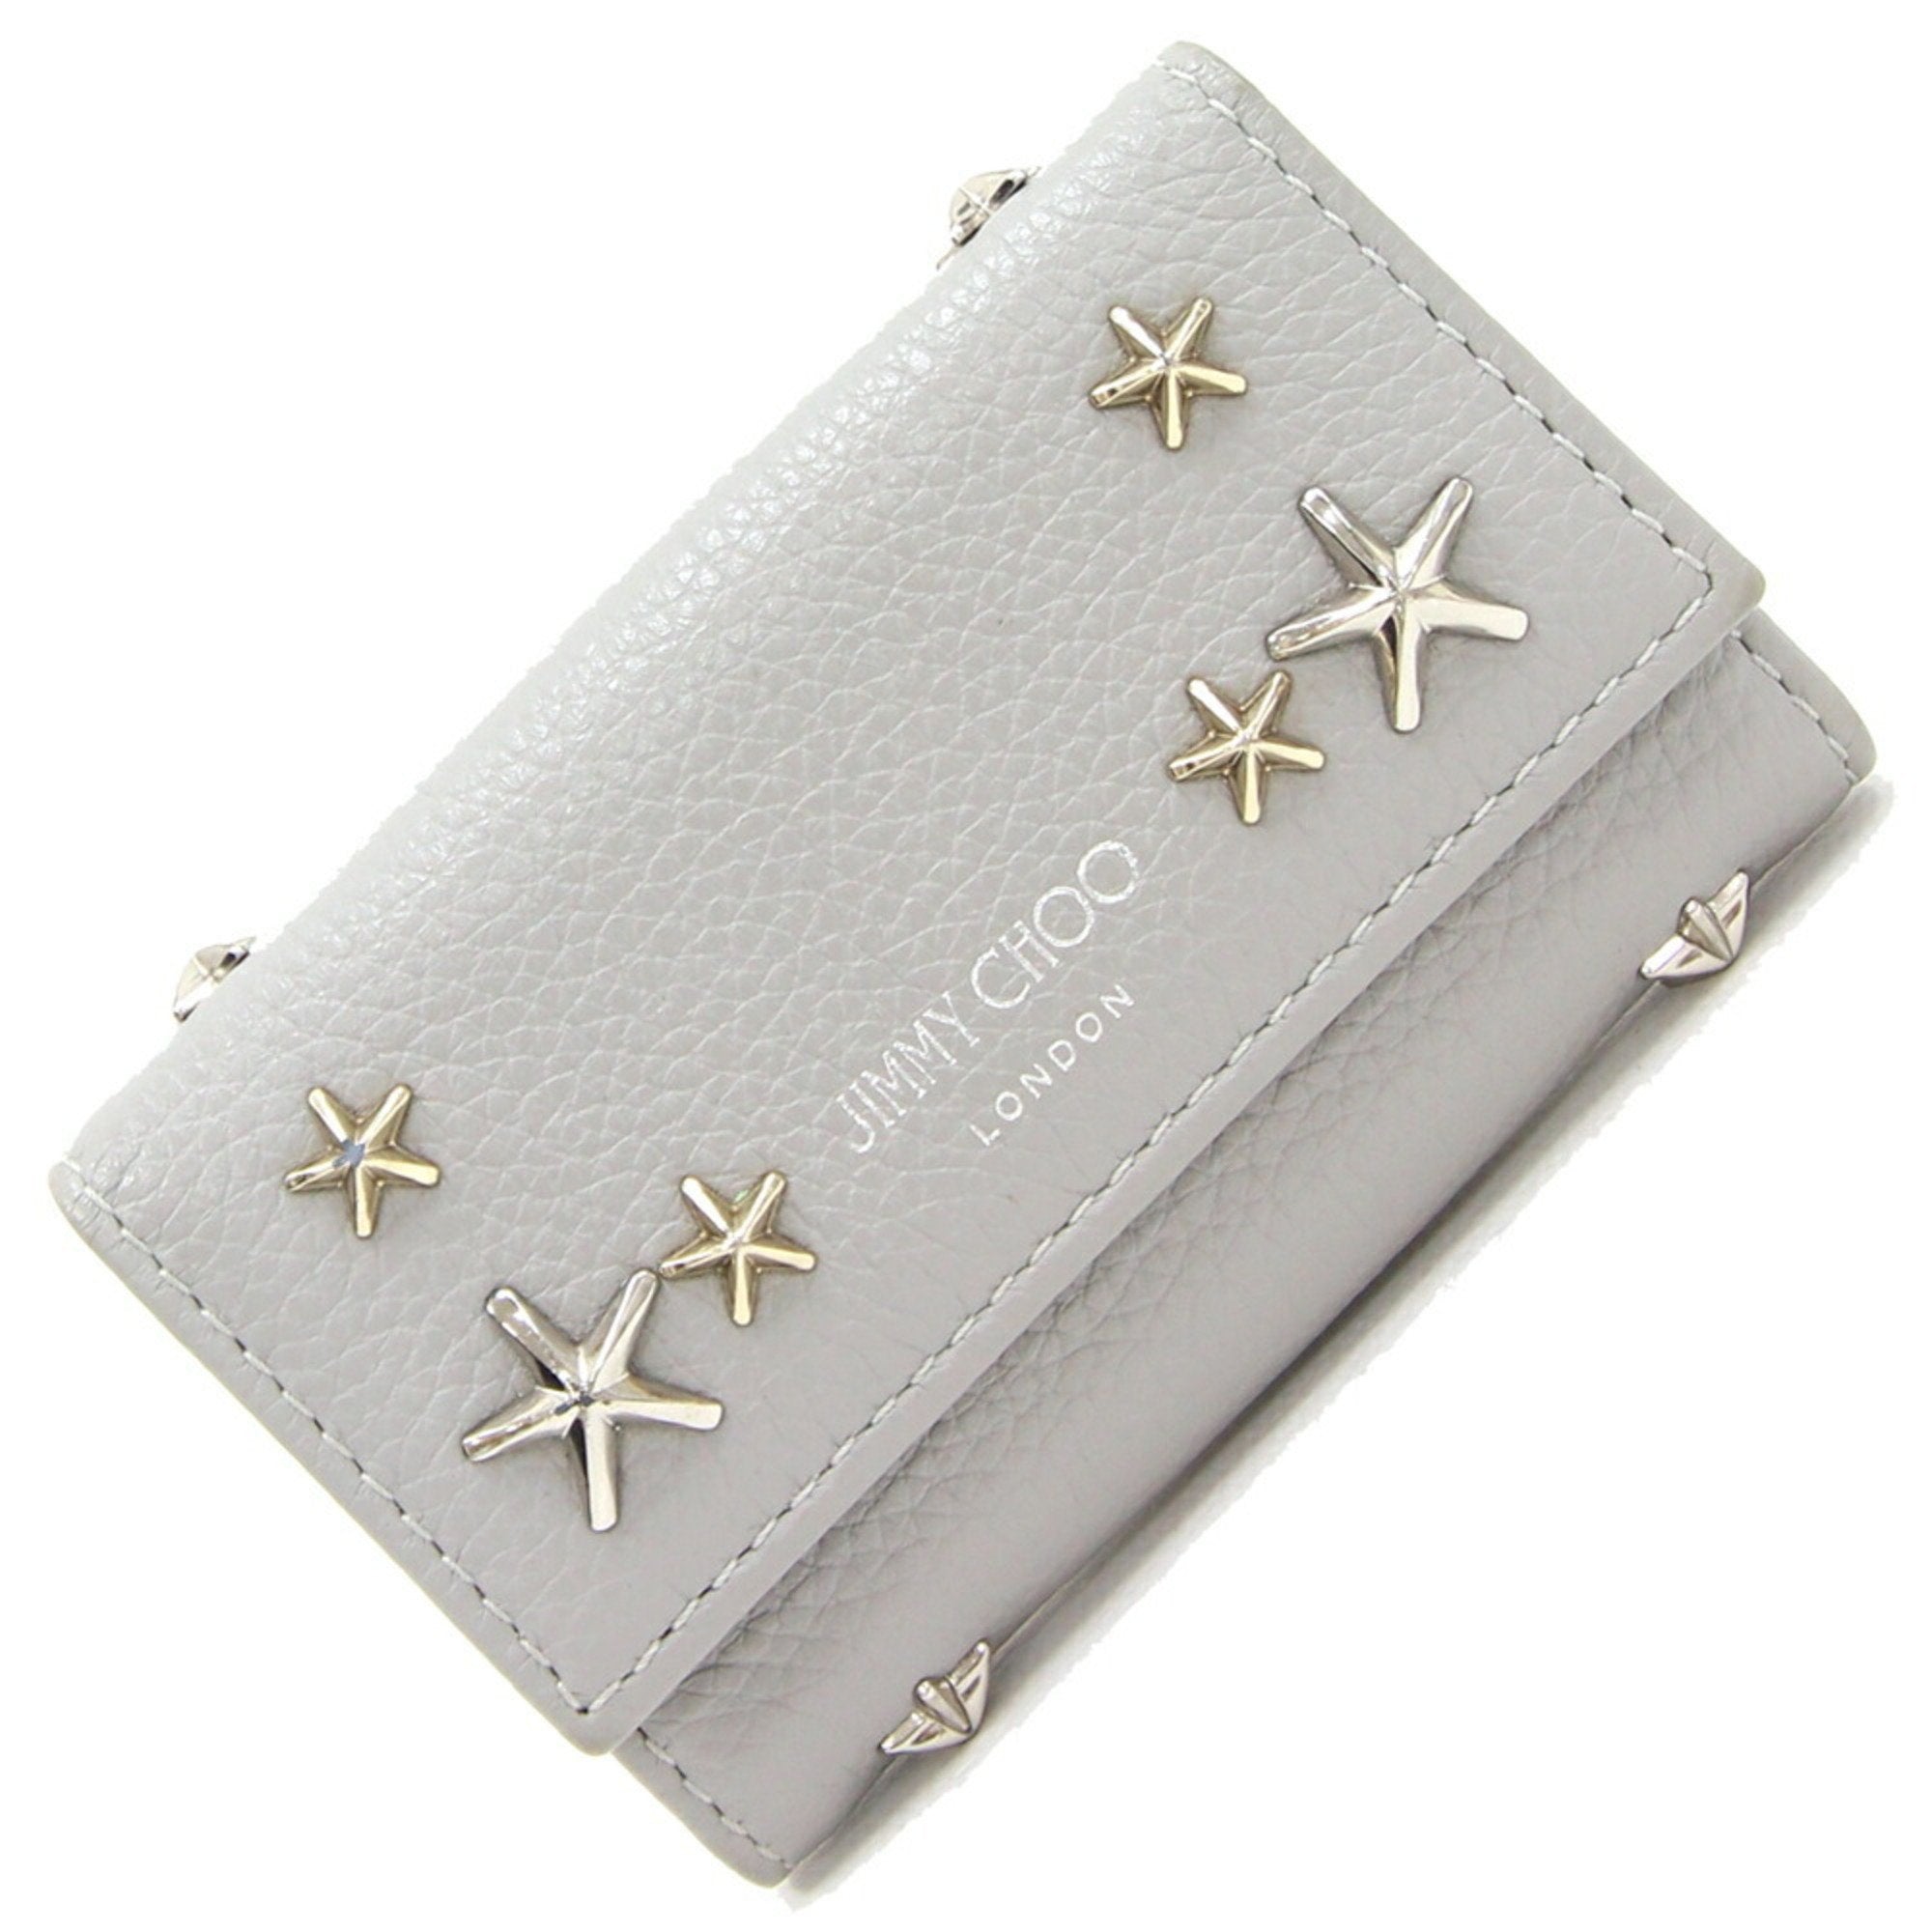 6-ring Key Case With Star Studs And Neptune 101953 Grey Leather Holder Ladies